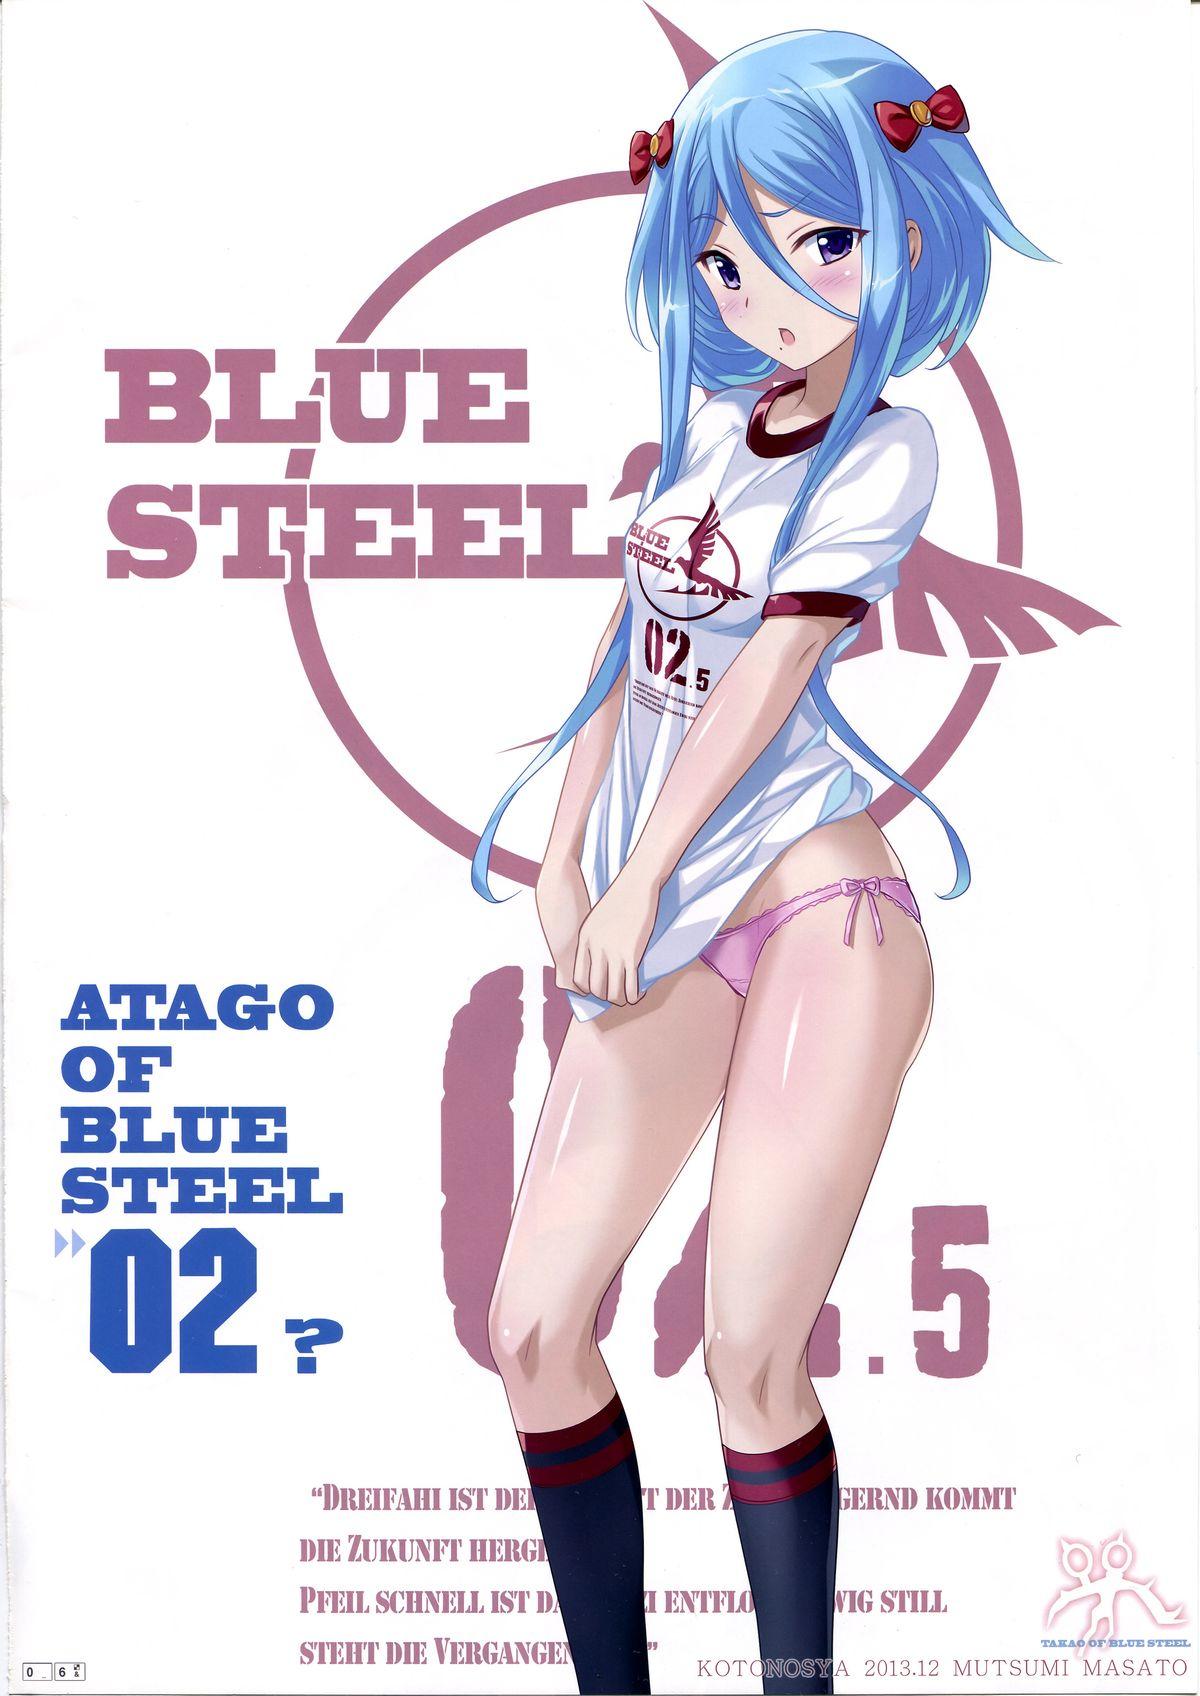 Bound TAKAO OF BLUE STEEL 02 - Arpeggio of blue steel Stretching - Page 5